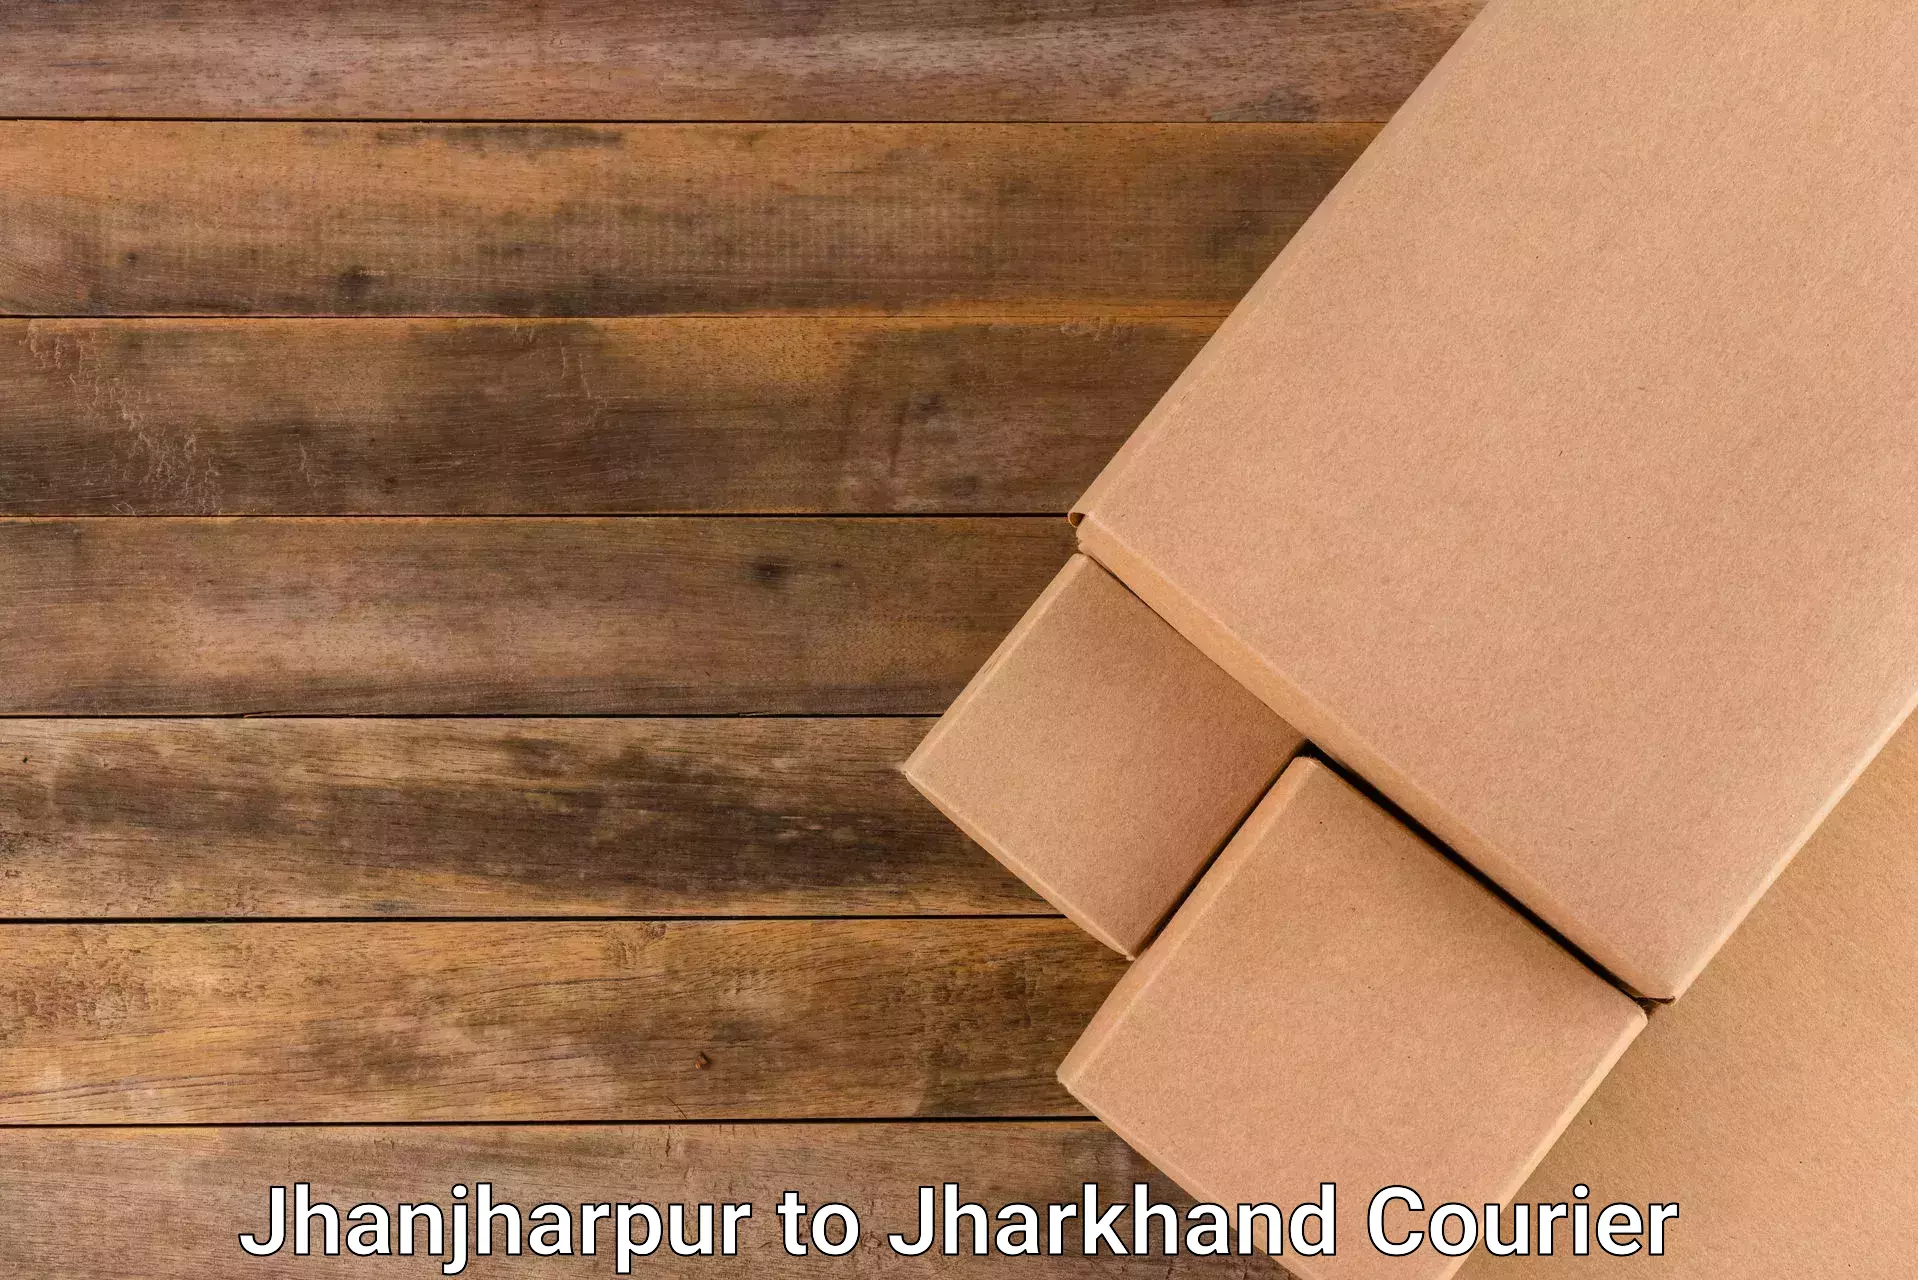 Full-service courier options Jhanjharpur to Jharkhand